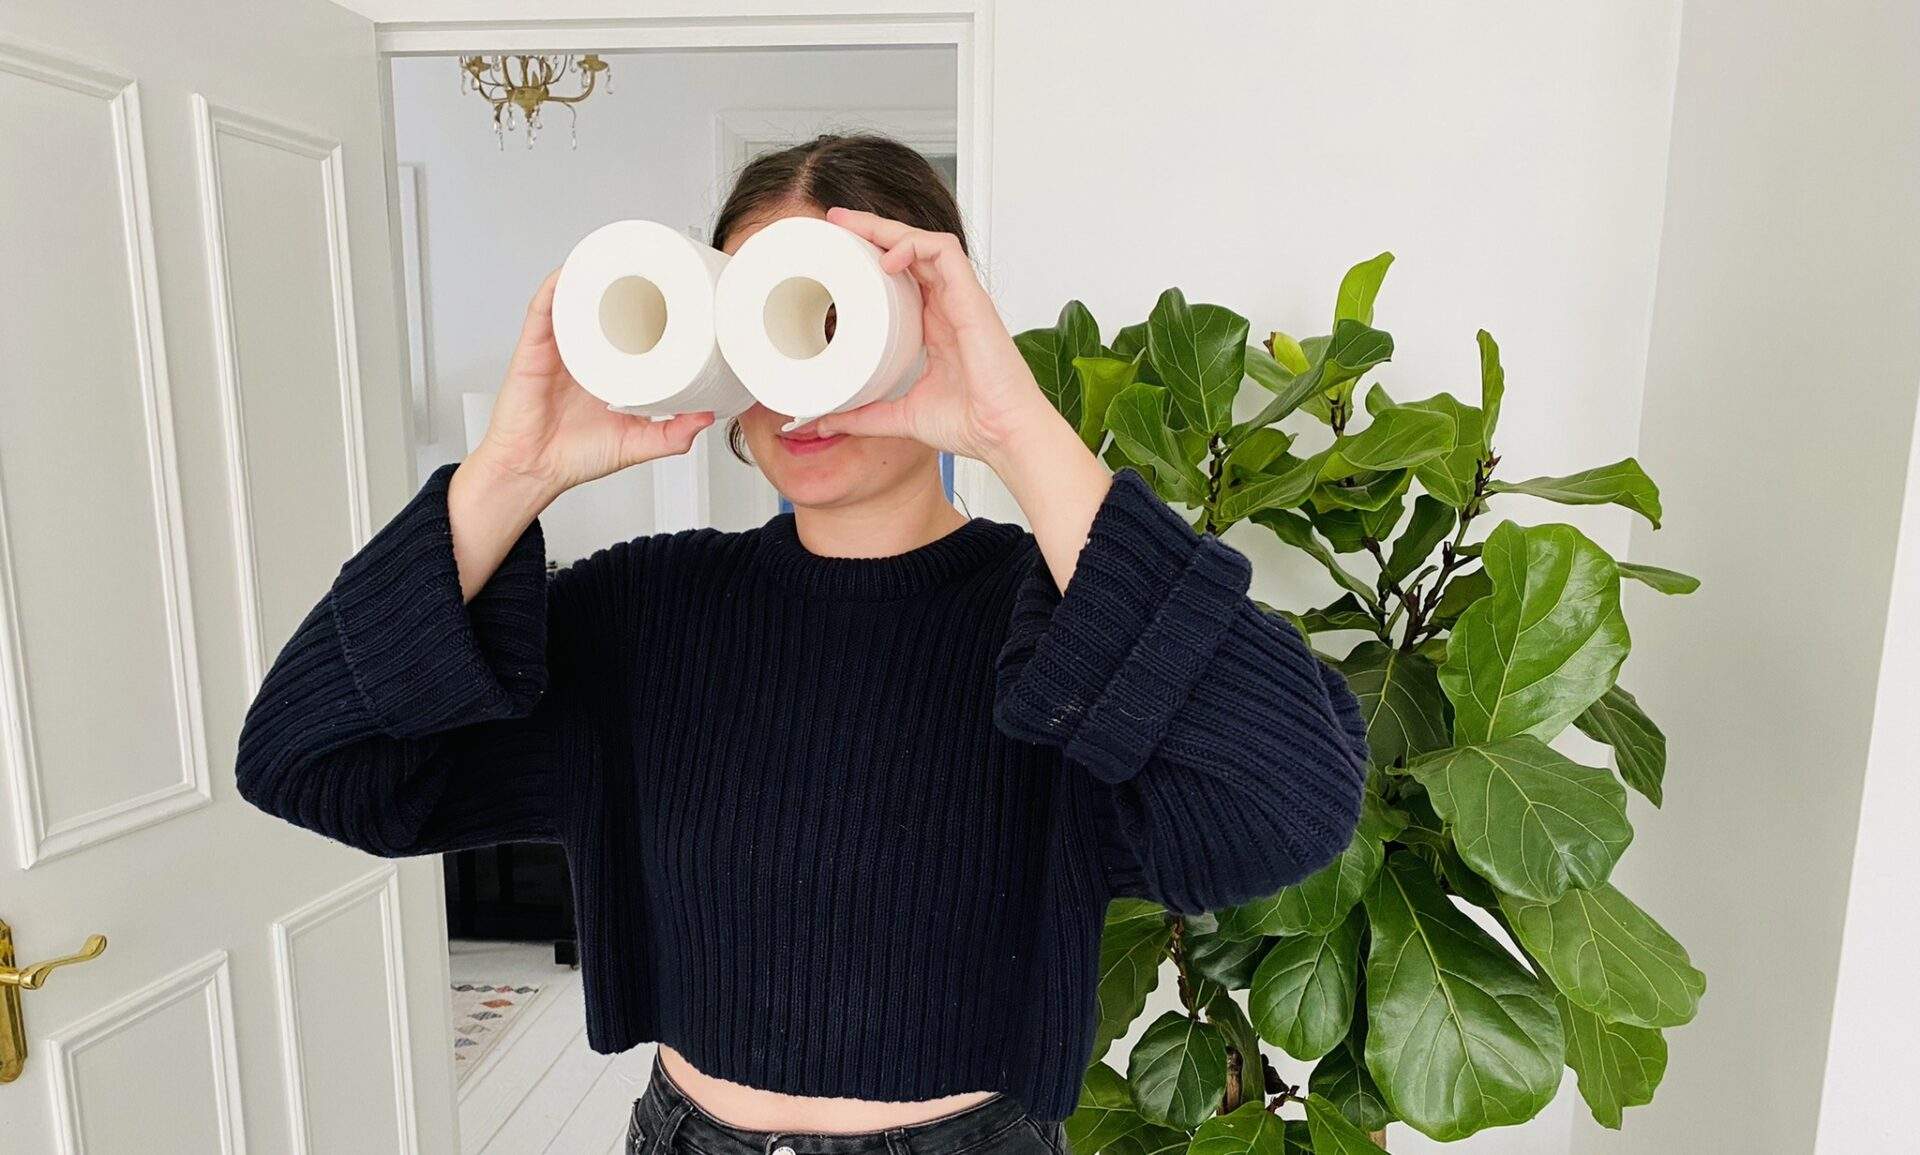 Lucy searching for the best eco toilet roll with her toilet roll binoculars